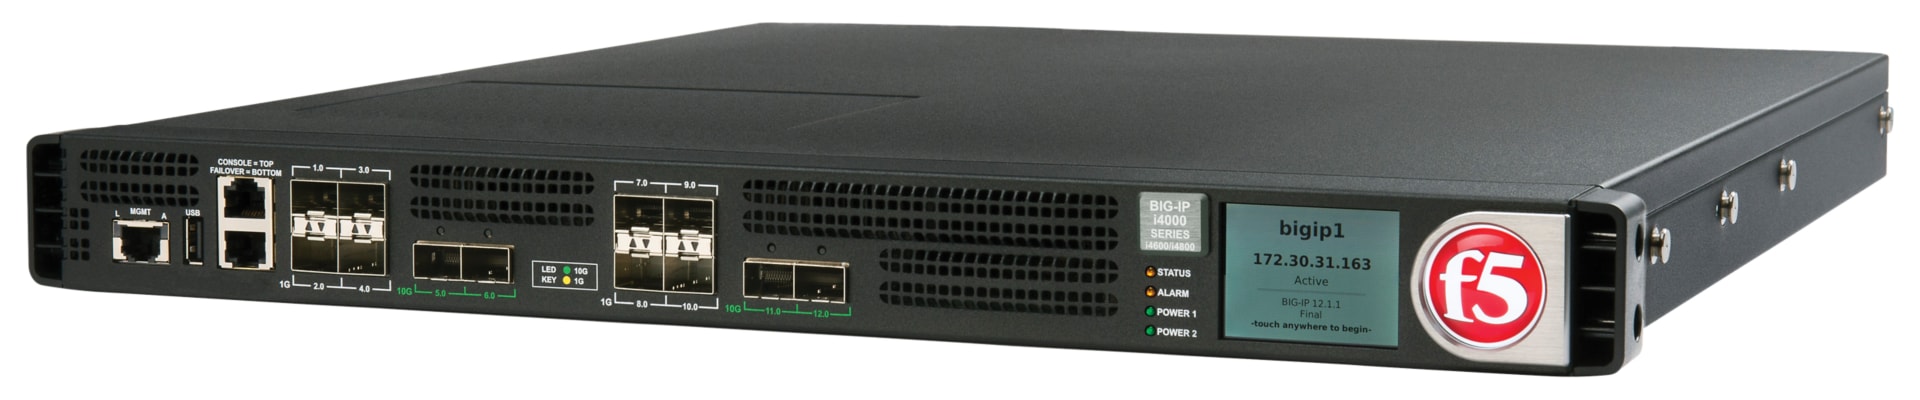 F5 BIG-IP iSeries Local Traffic Manager i4800 - security appliance